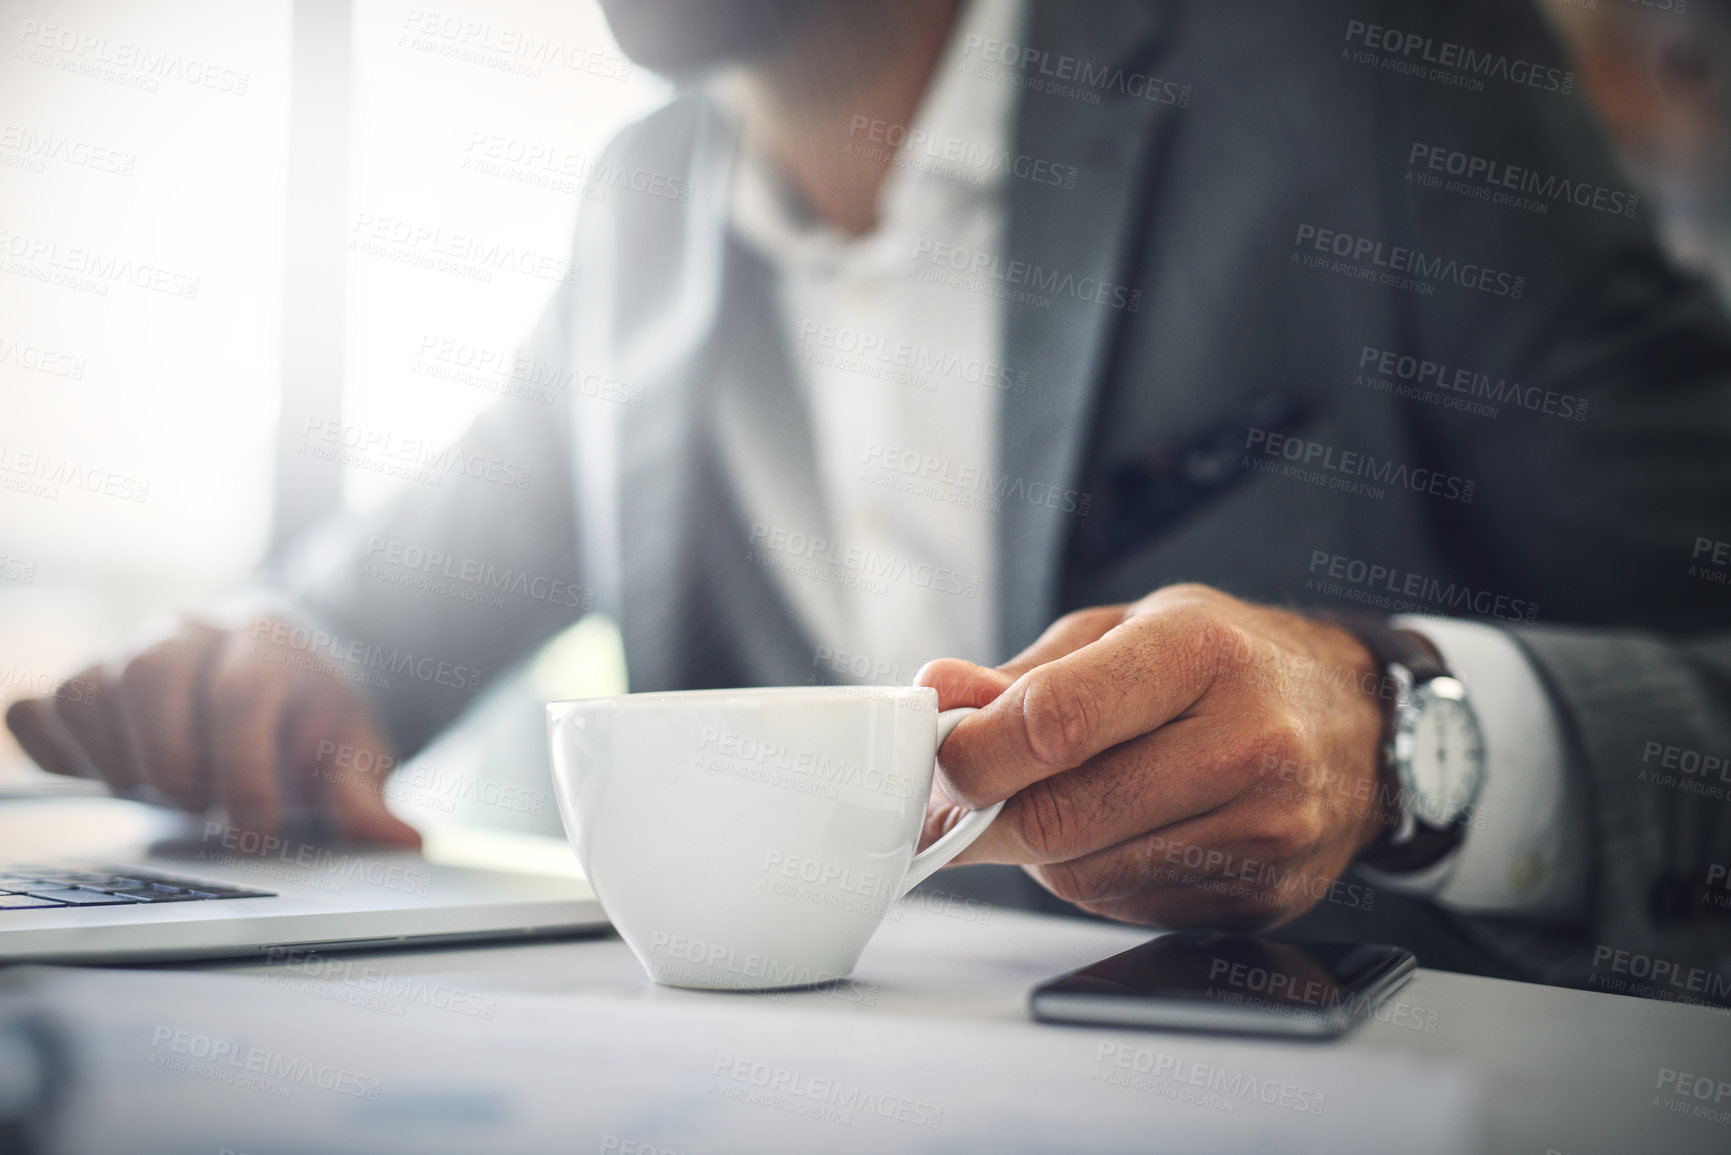 Buy stock photo Shot of an unrecognizable businessman working on his laptop while drinking coffee inside of the office